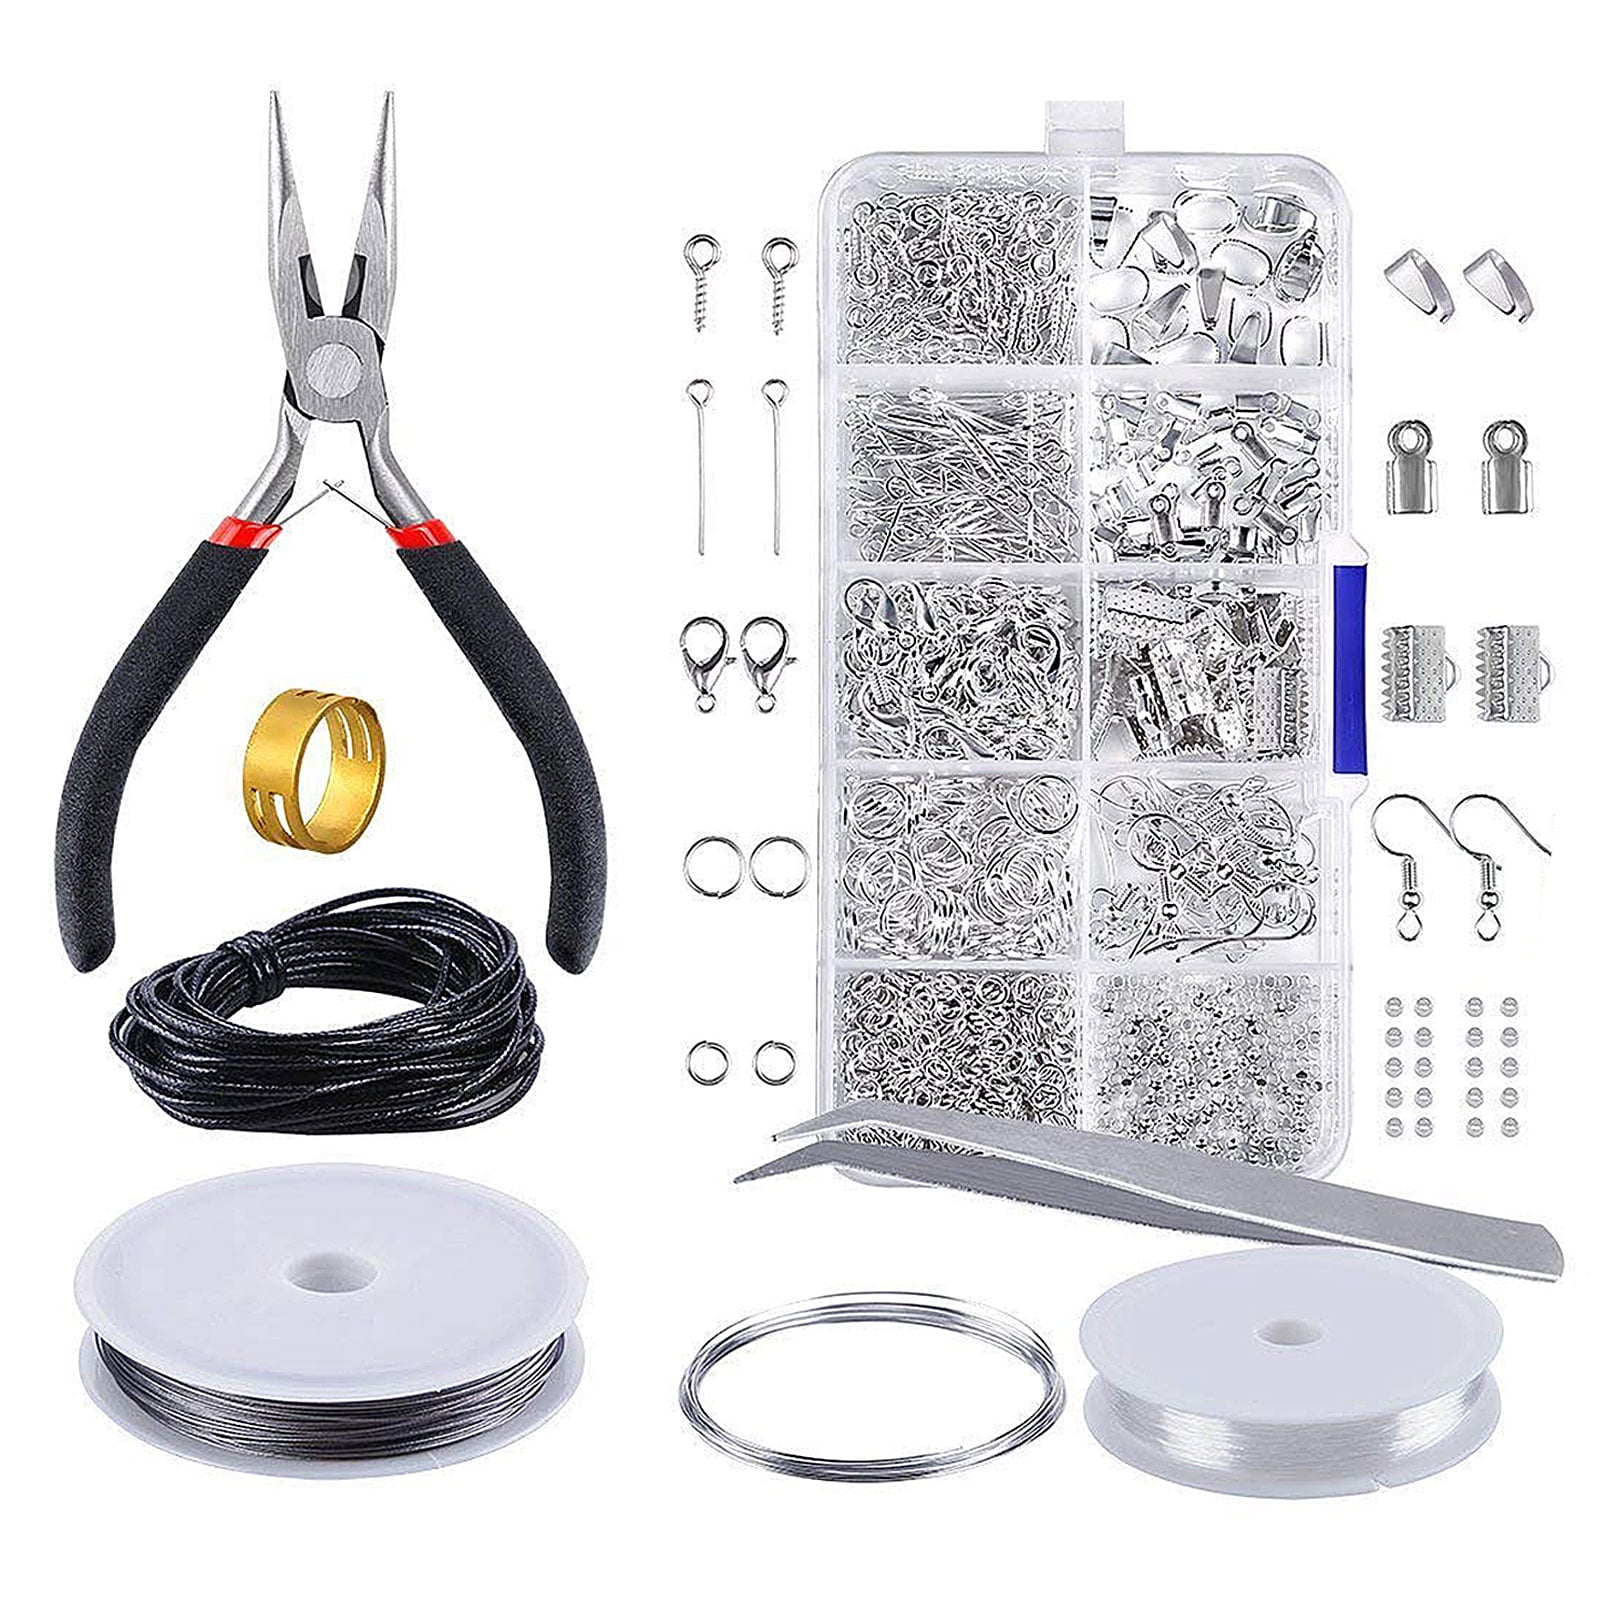 2240Pcs Open Jump Rings and Lobster Clasps, GTAAOY Jump Rings for Jewelry  Making Kit with Pliers Tweezers, Perfect Jewelry Findings Kit for Jewelry